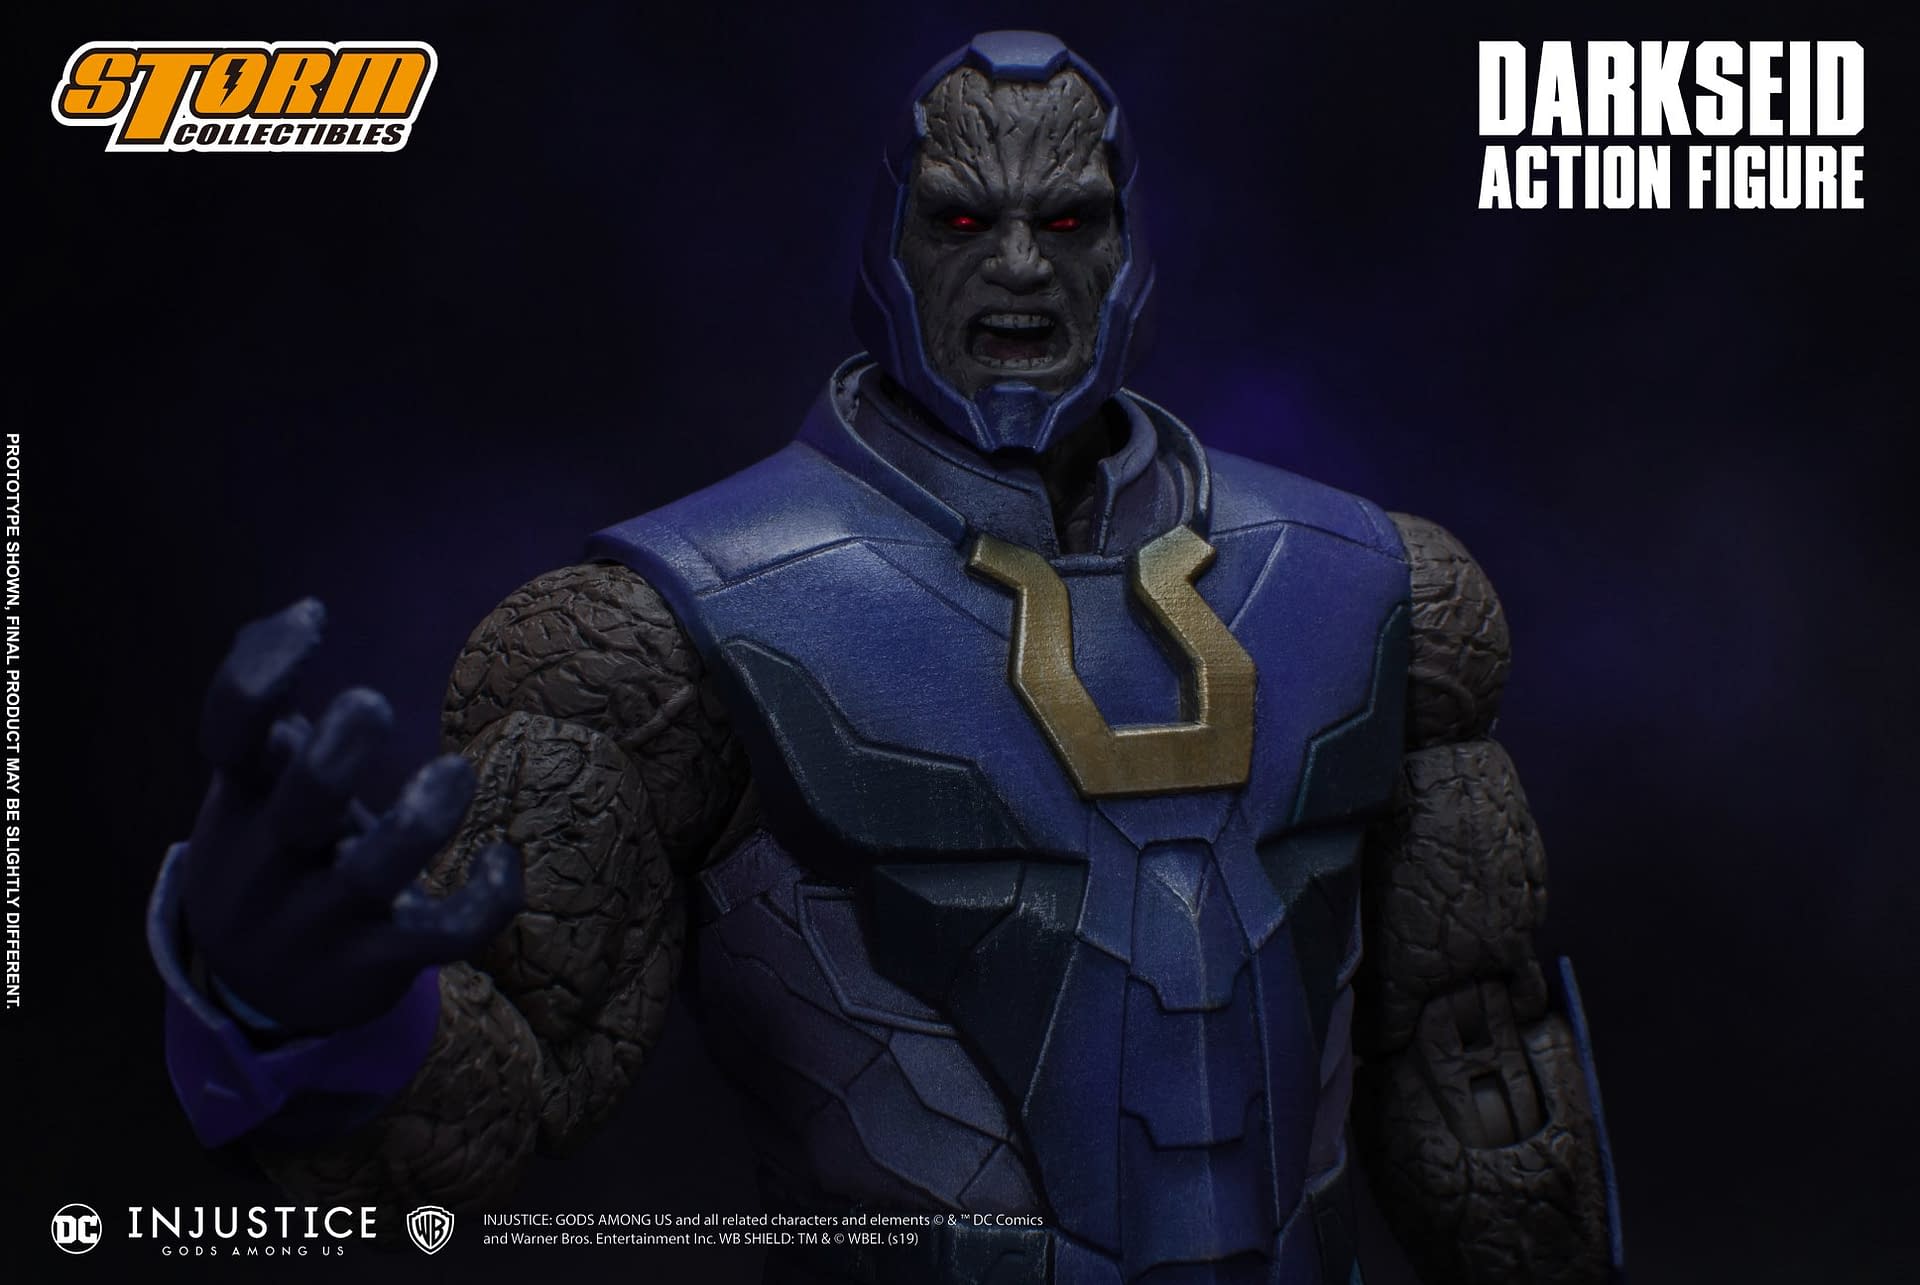 Darkseid Has Arrived in New 